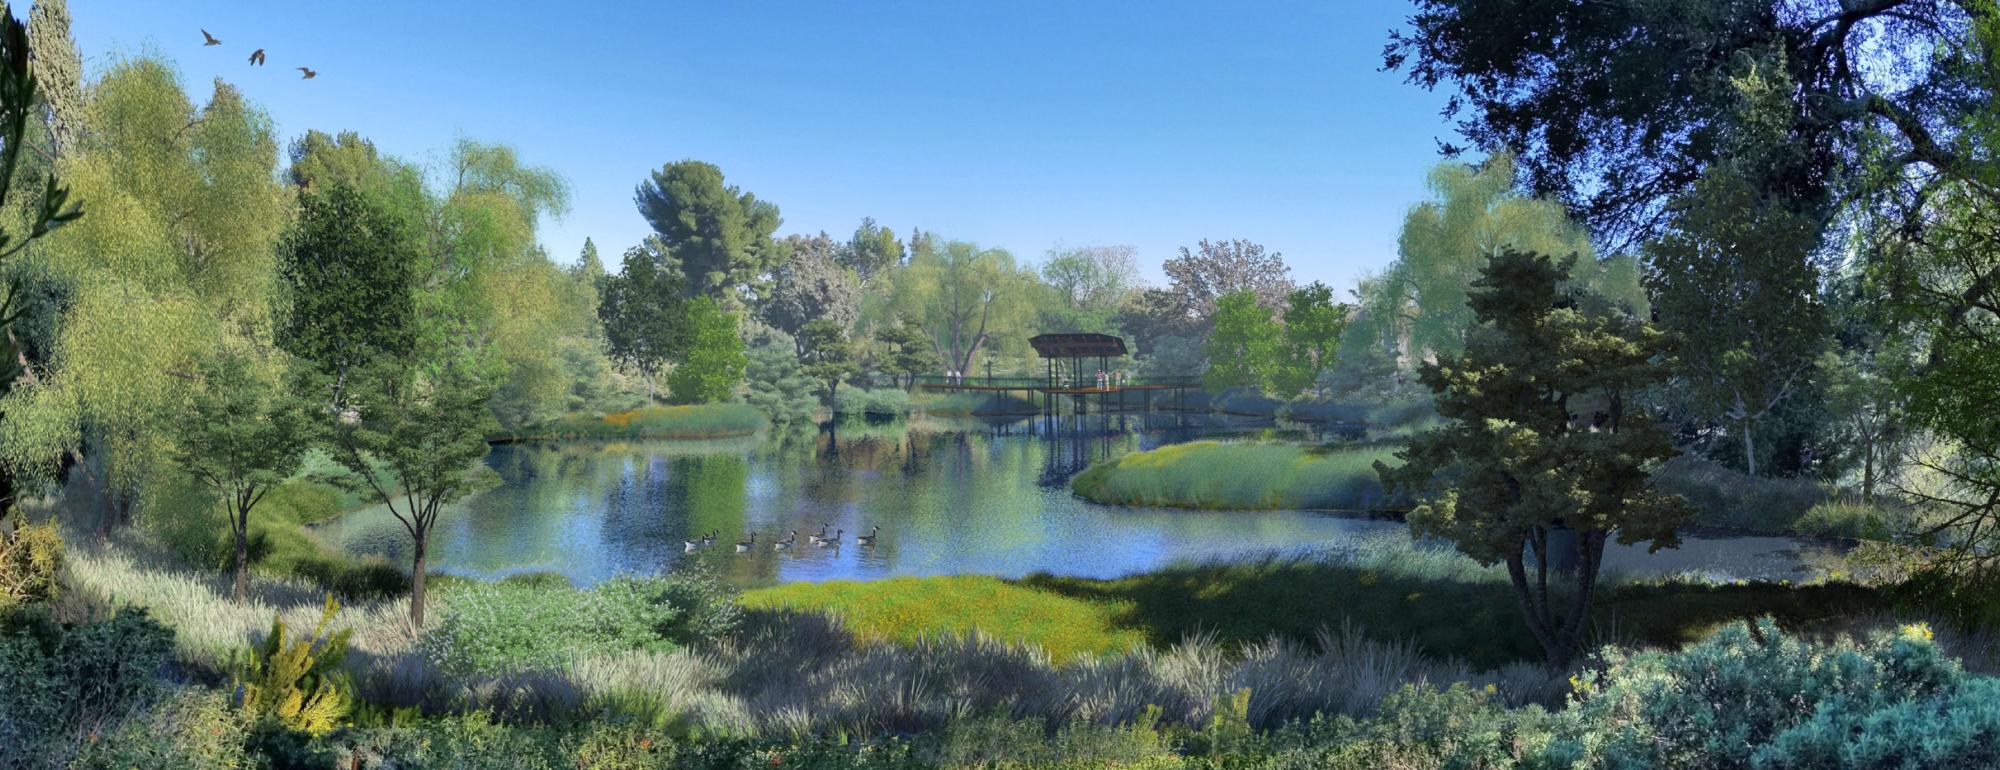 Photorealistic rendering of the future west-end of the UC Davis Arboretum Waterway with a viewing area for watching wildlife, Canadian geese in the water along with emergent marsh plantings, trees and perennial plantings.